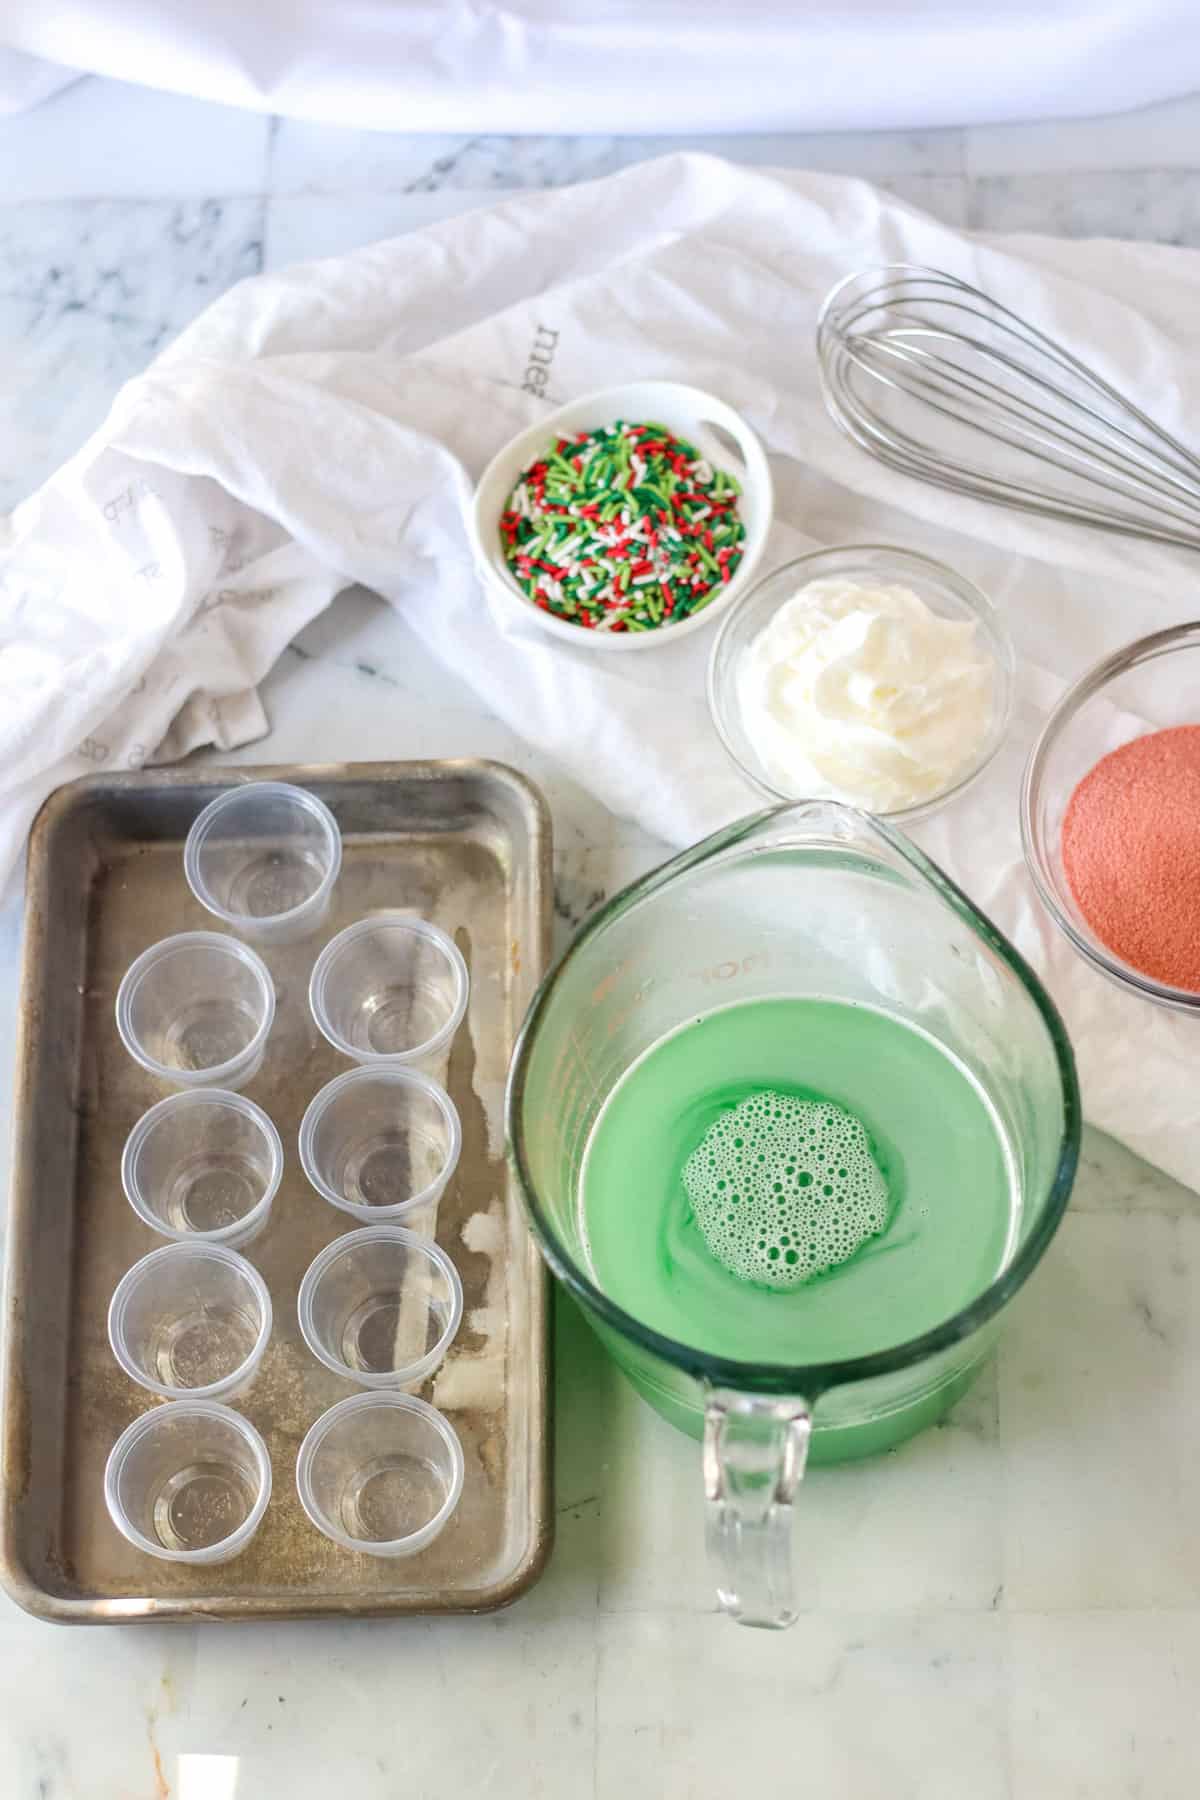 Large measuring cup with green jello mixture next to tray of shot glasses.